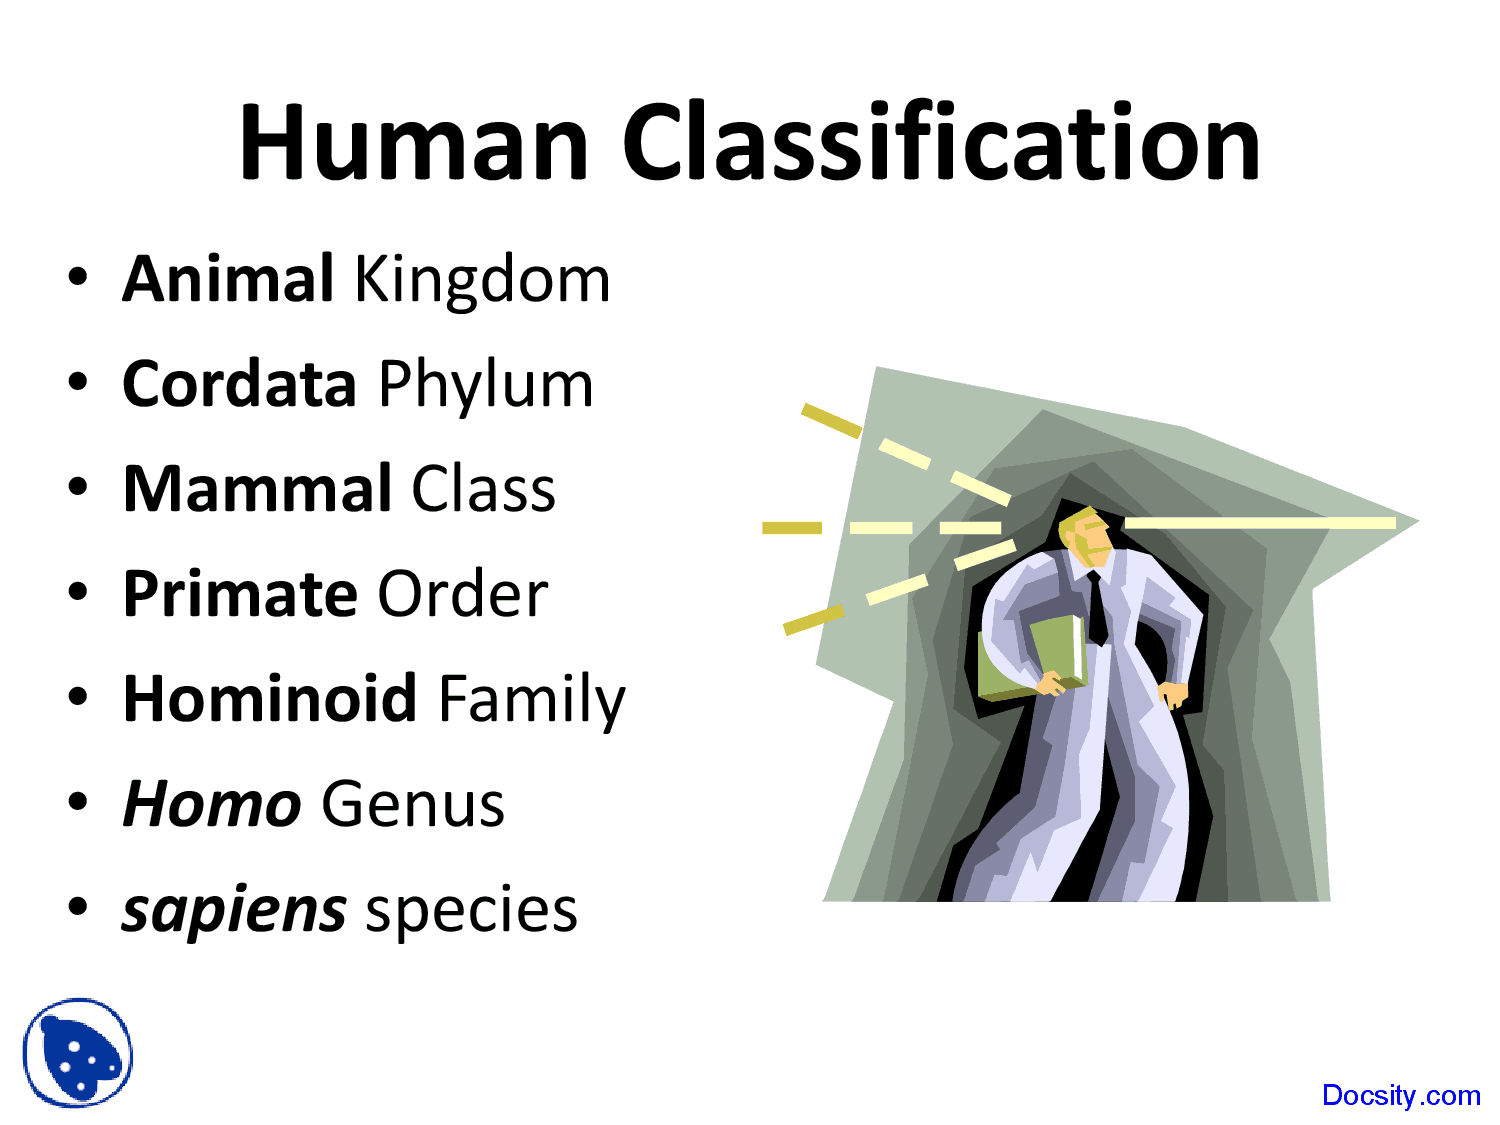 Human Classification - International Baccalaureate Biology - Lecture Slides - Docsity